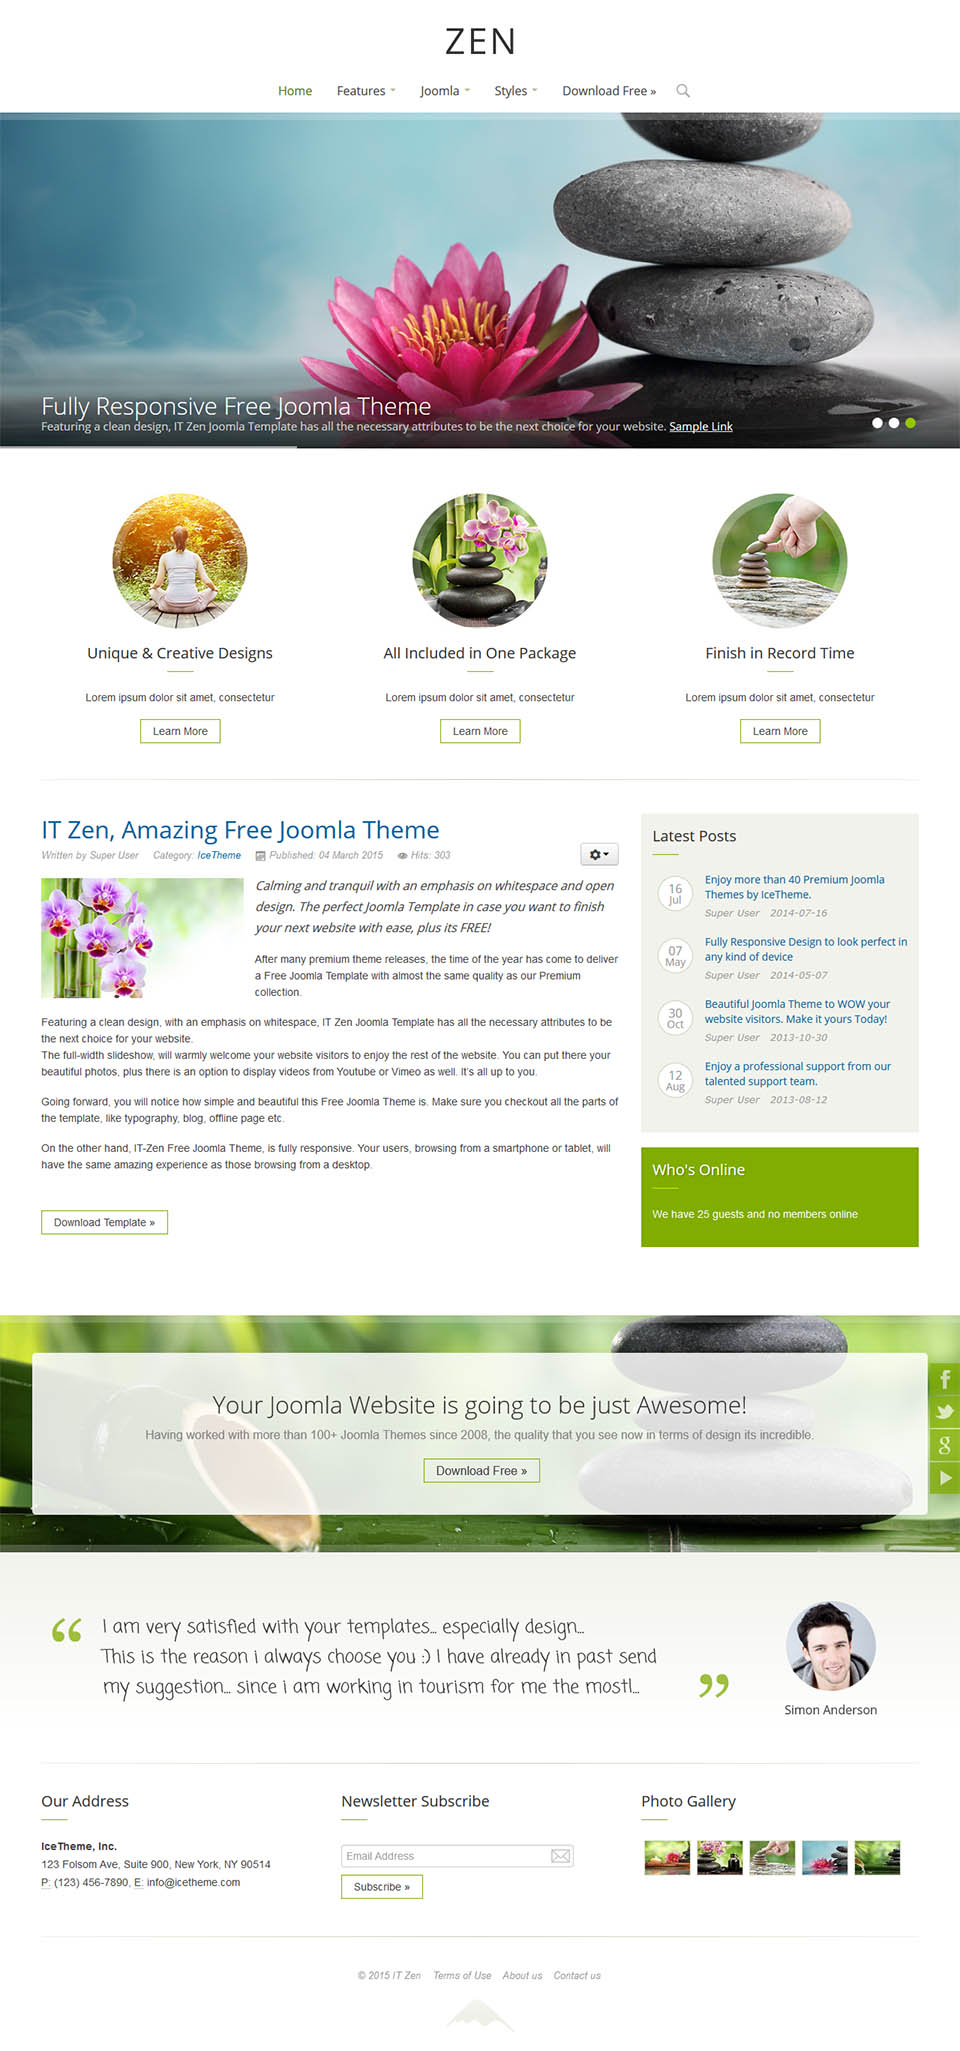 Icetheme Zen V1 0 0 The Template Blog About Health And Beauty For Joomla